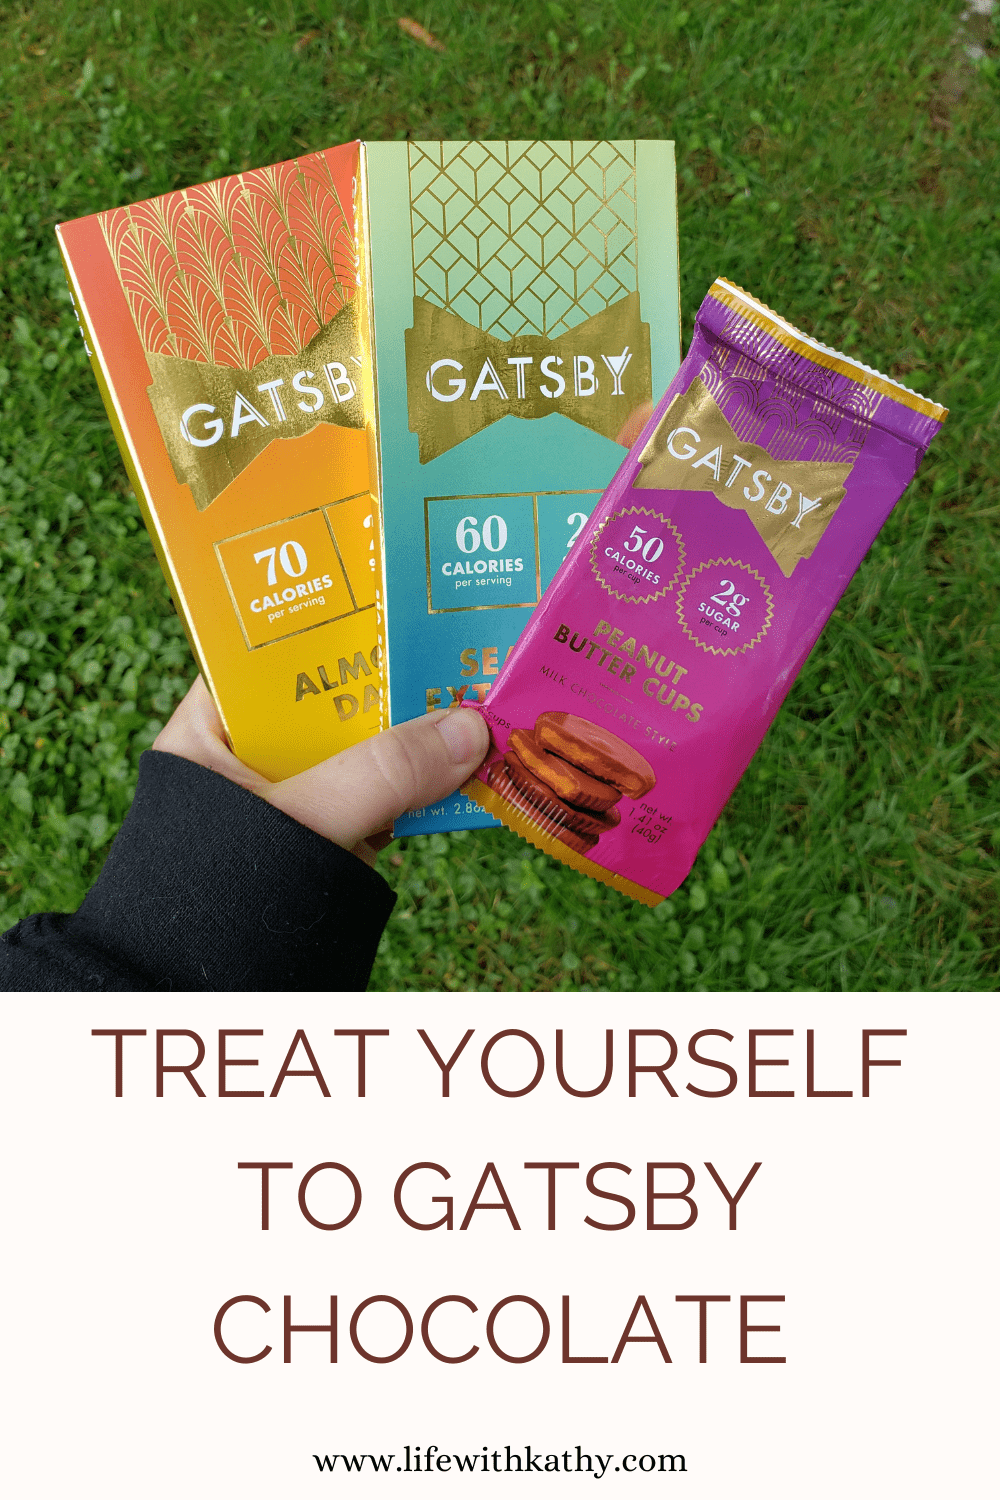 Treat Yourself to GATSBY Chocolate - Life With Kathy